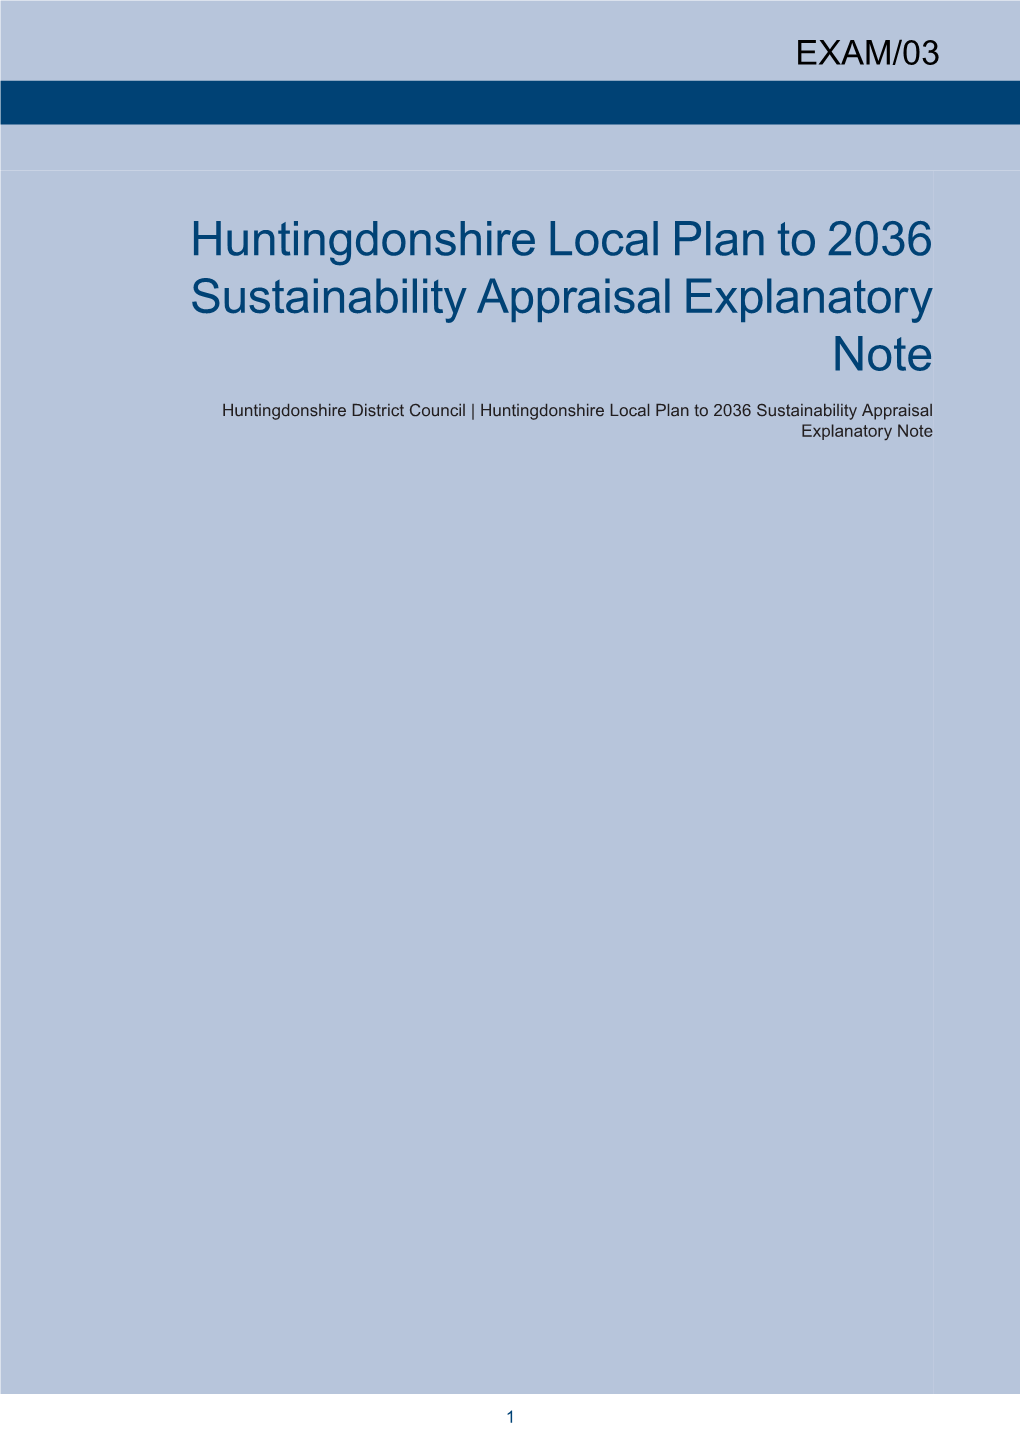 Huntingdonshire Local Plan to 2036 Sustainability Appraisal Explanatory Note